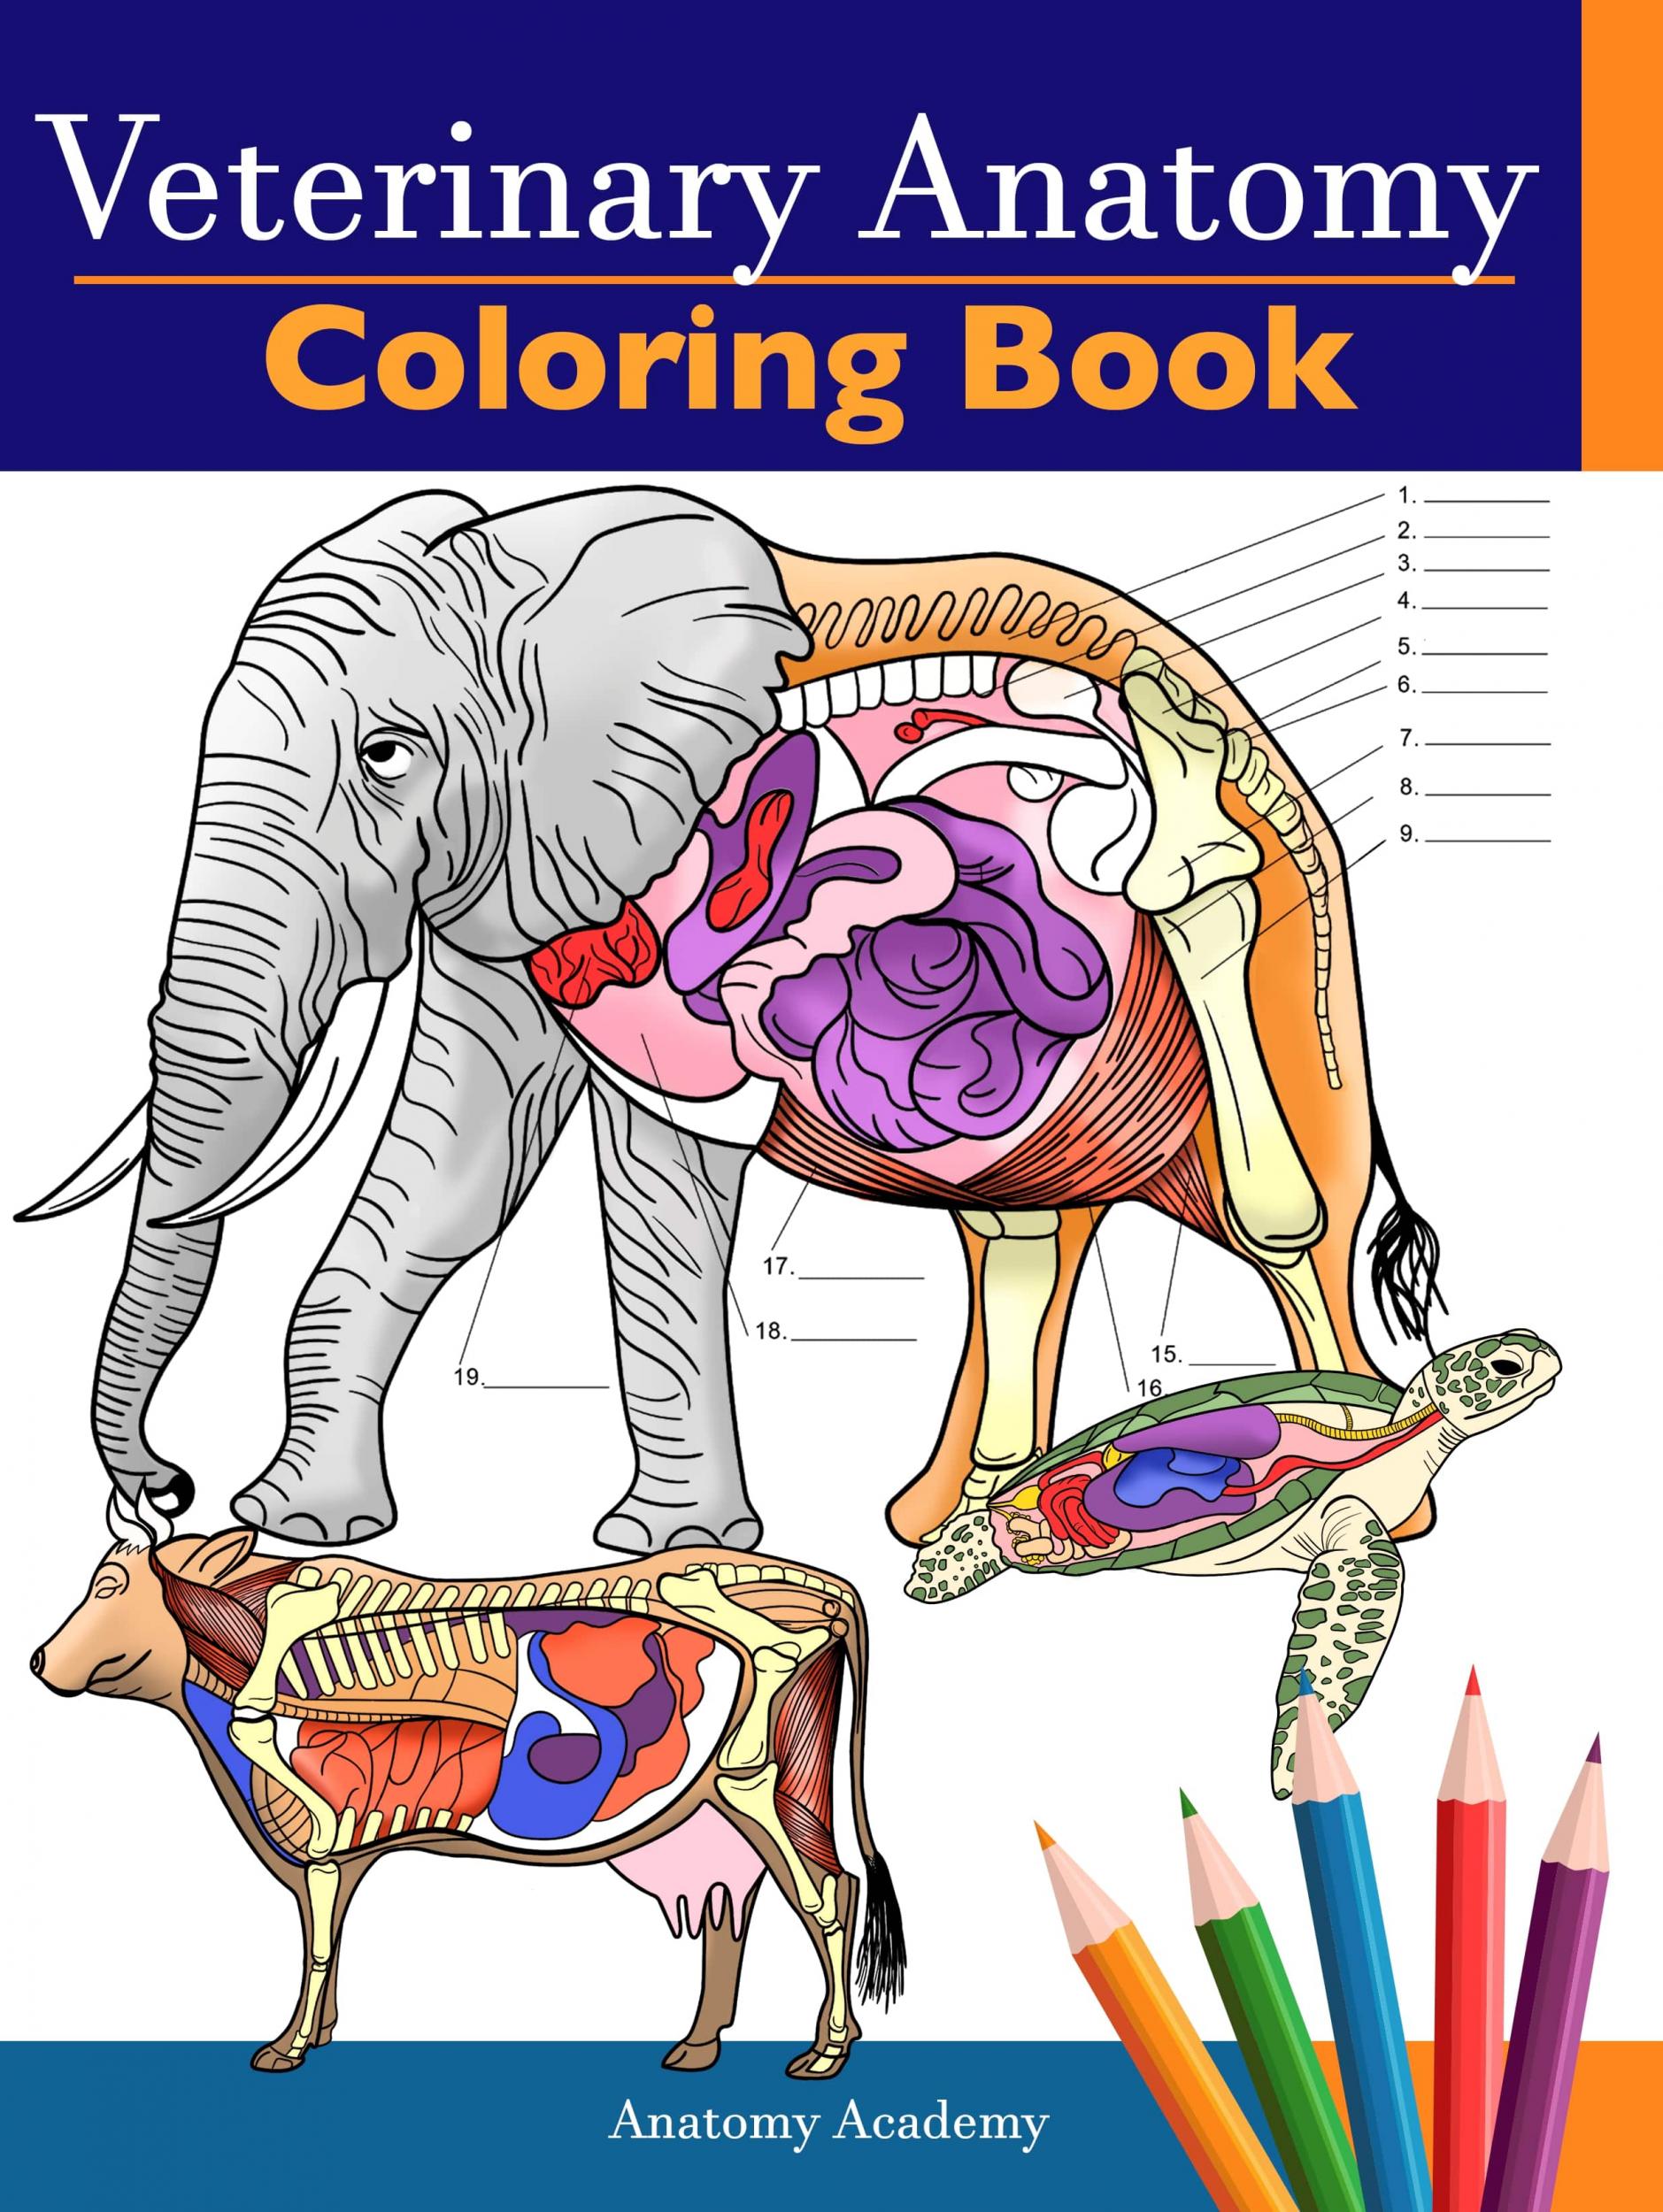 Download ARC for Veterinary Anatomy Coloring Book by Anatomy Academy on Booksprout